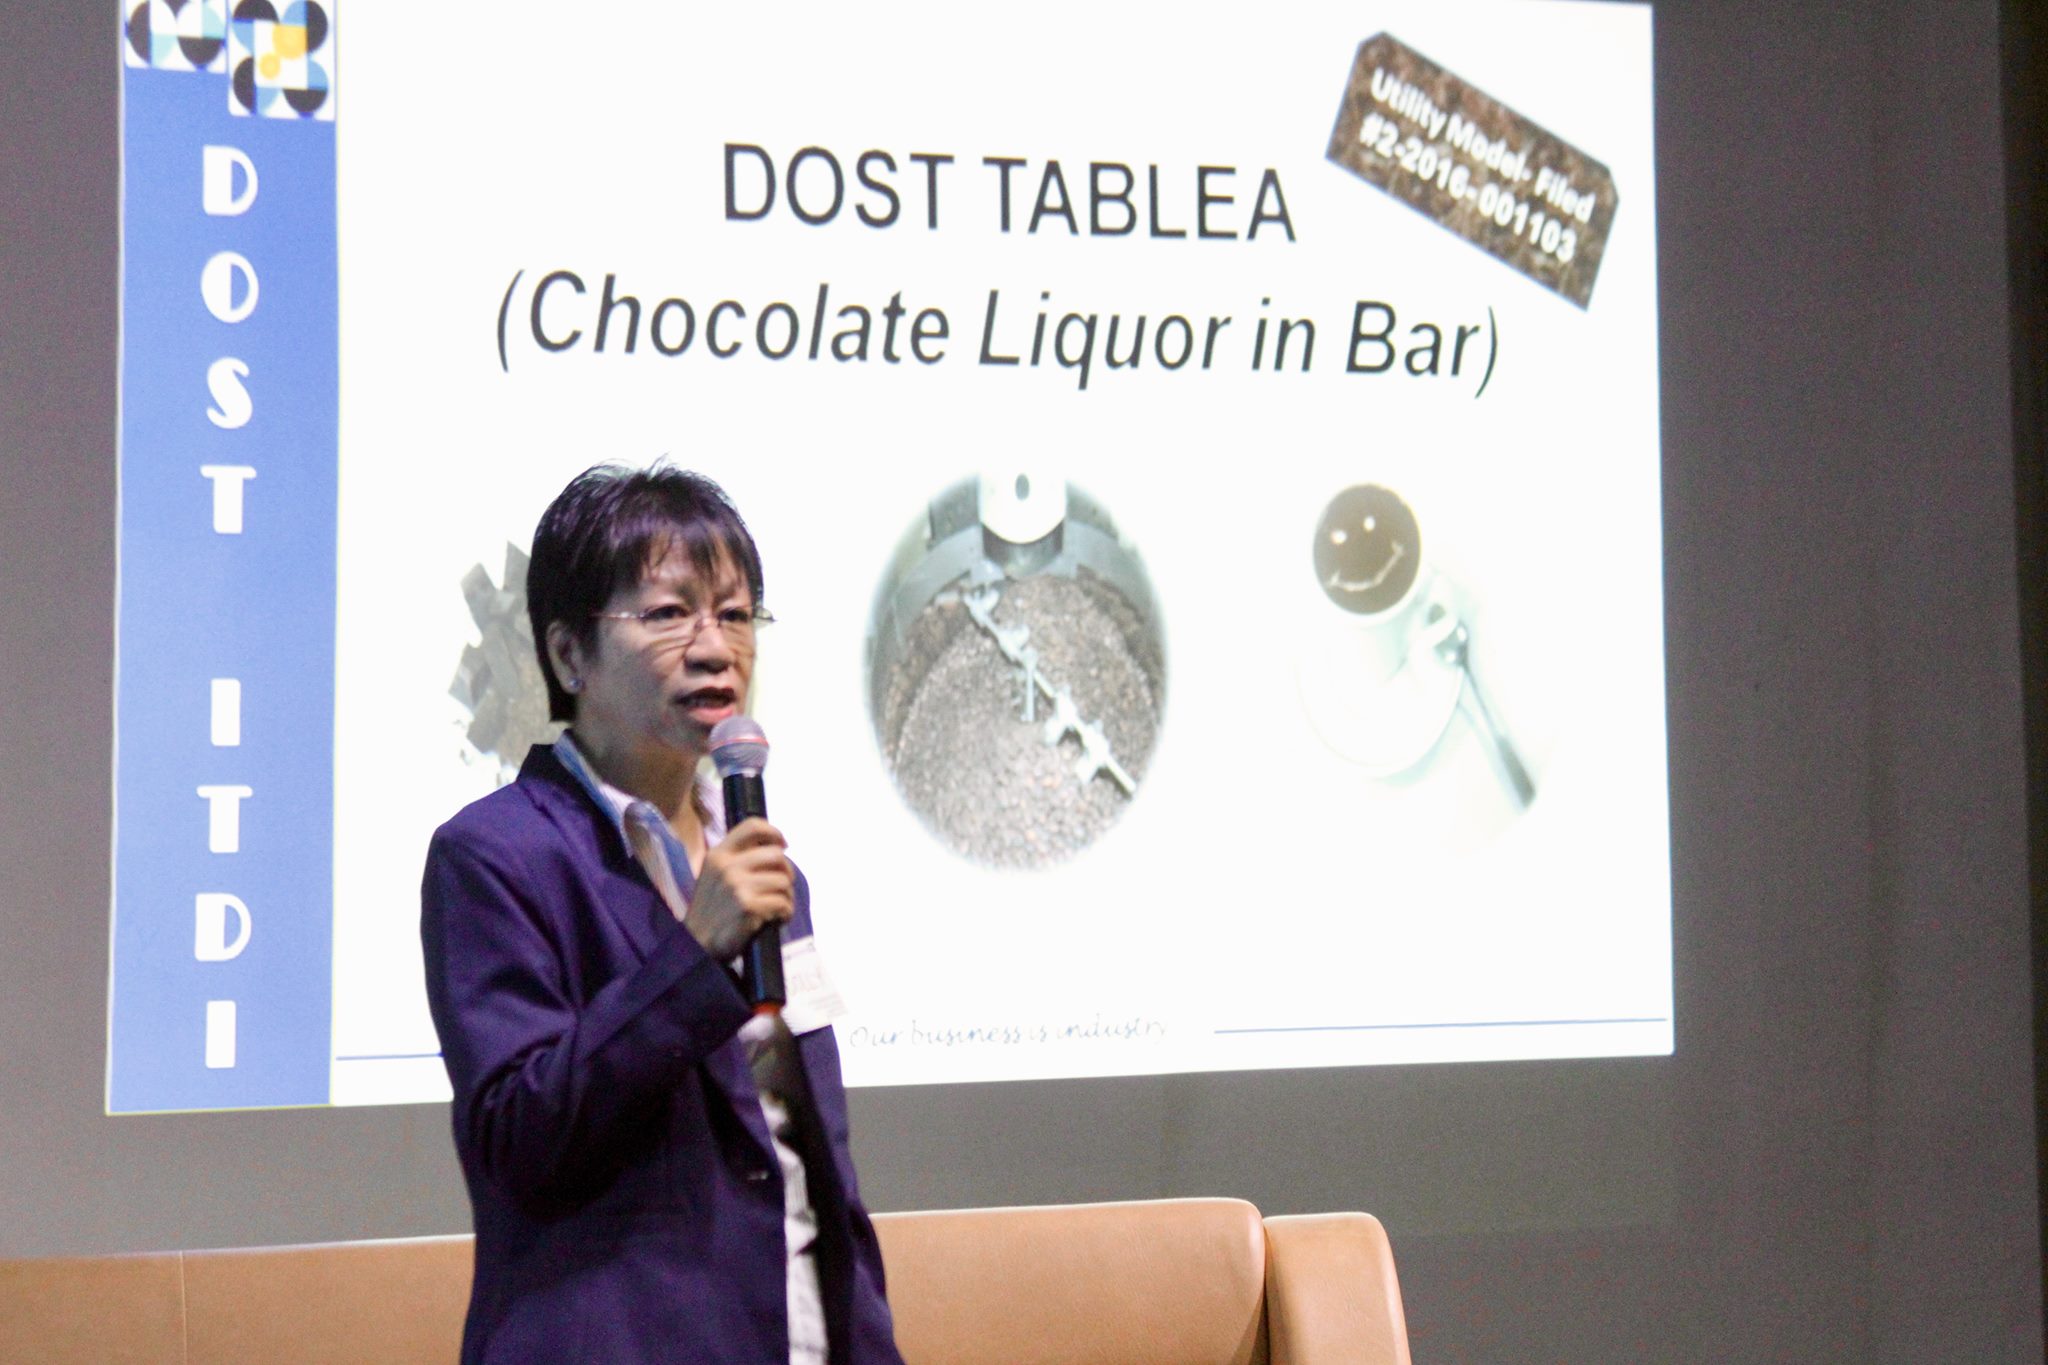 news dost developed processing technologies to improve cacao based products1 11282017